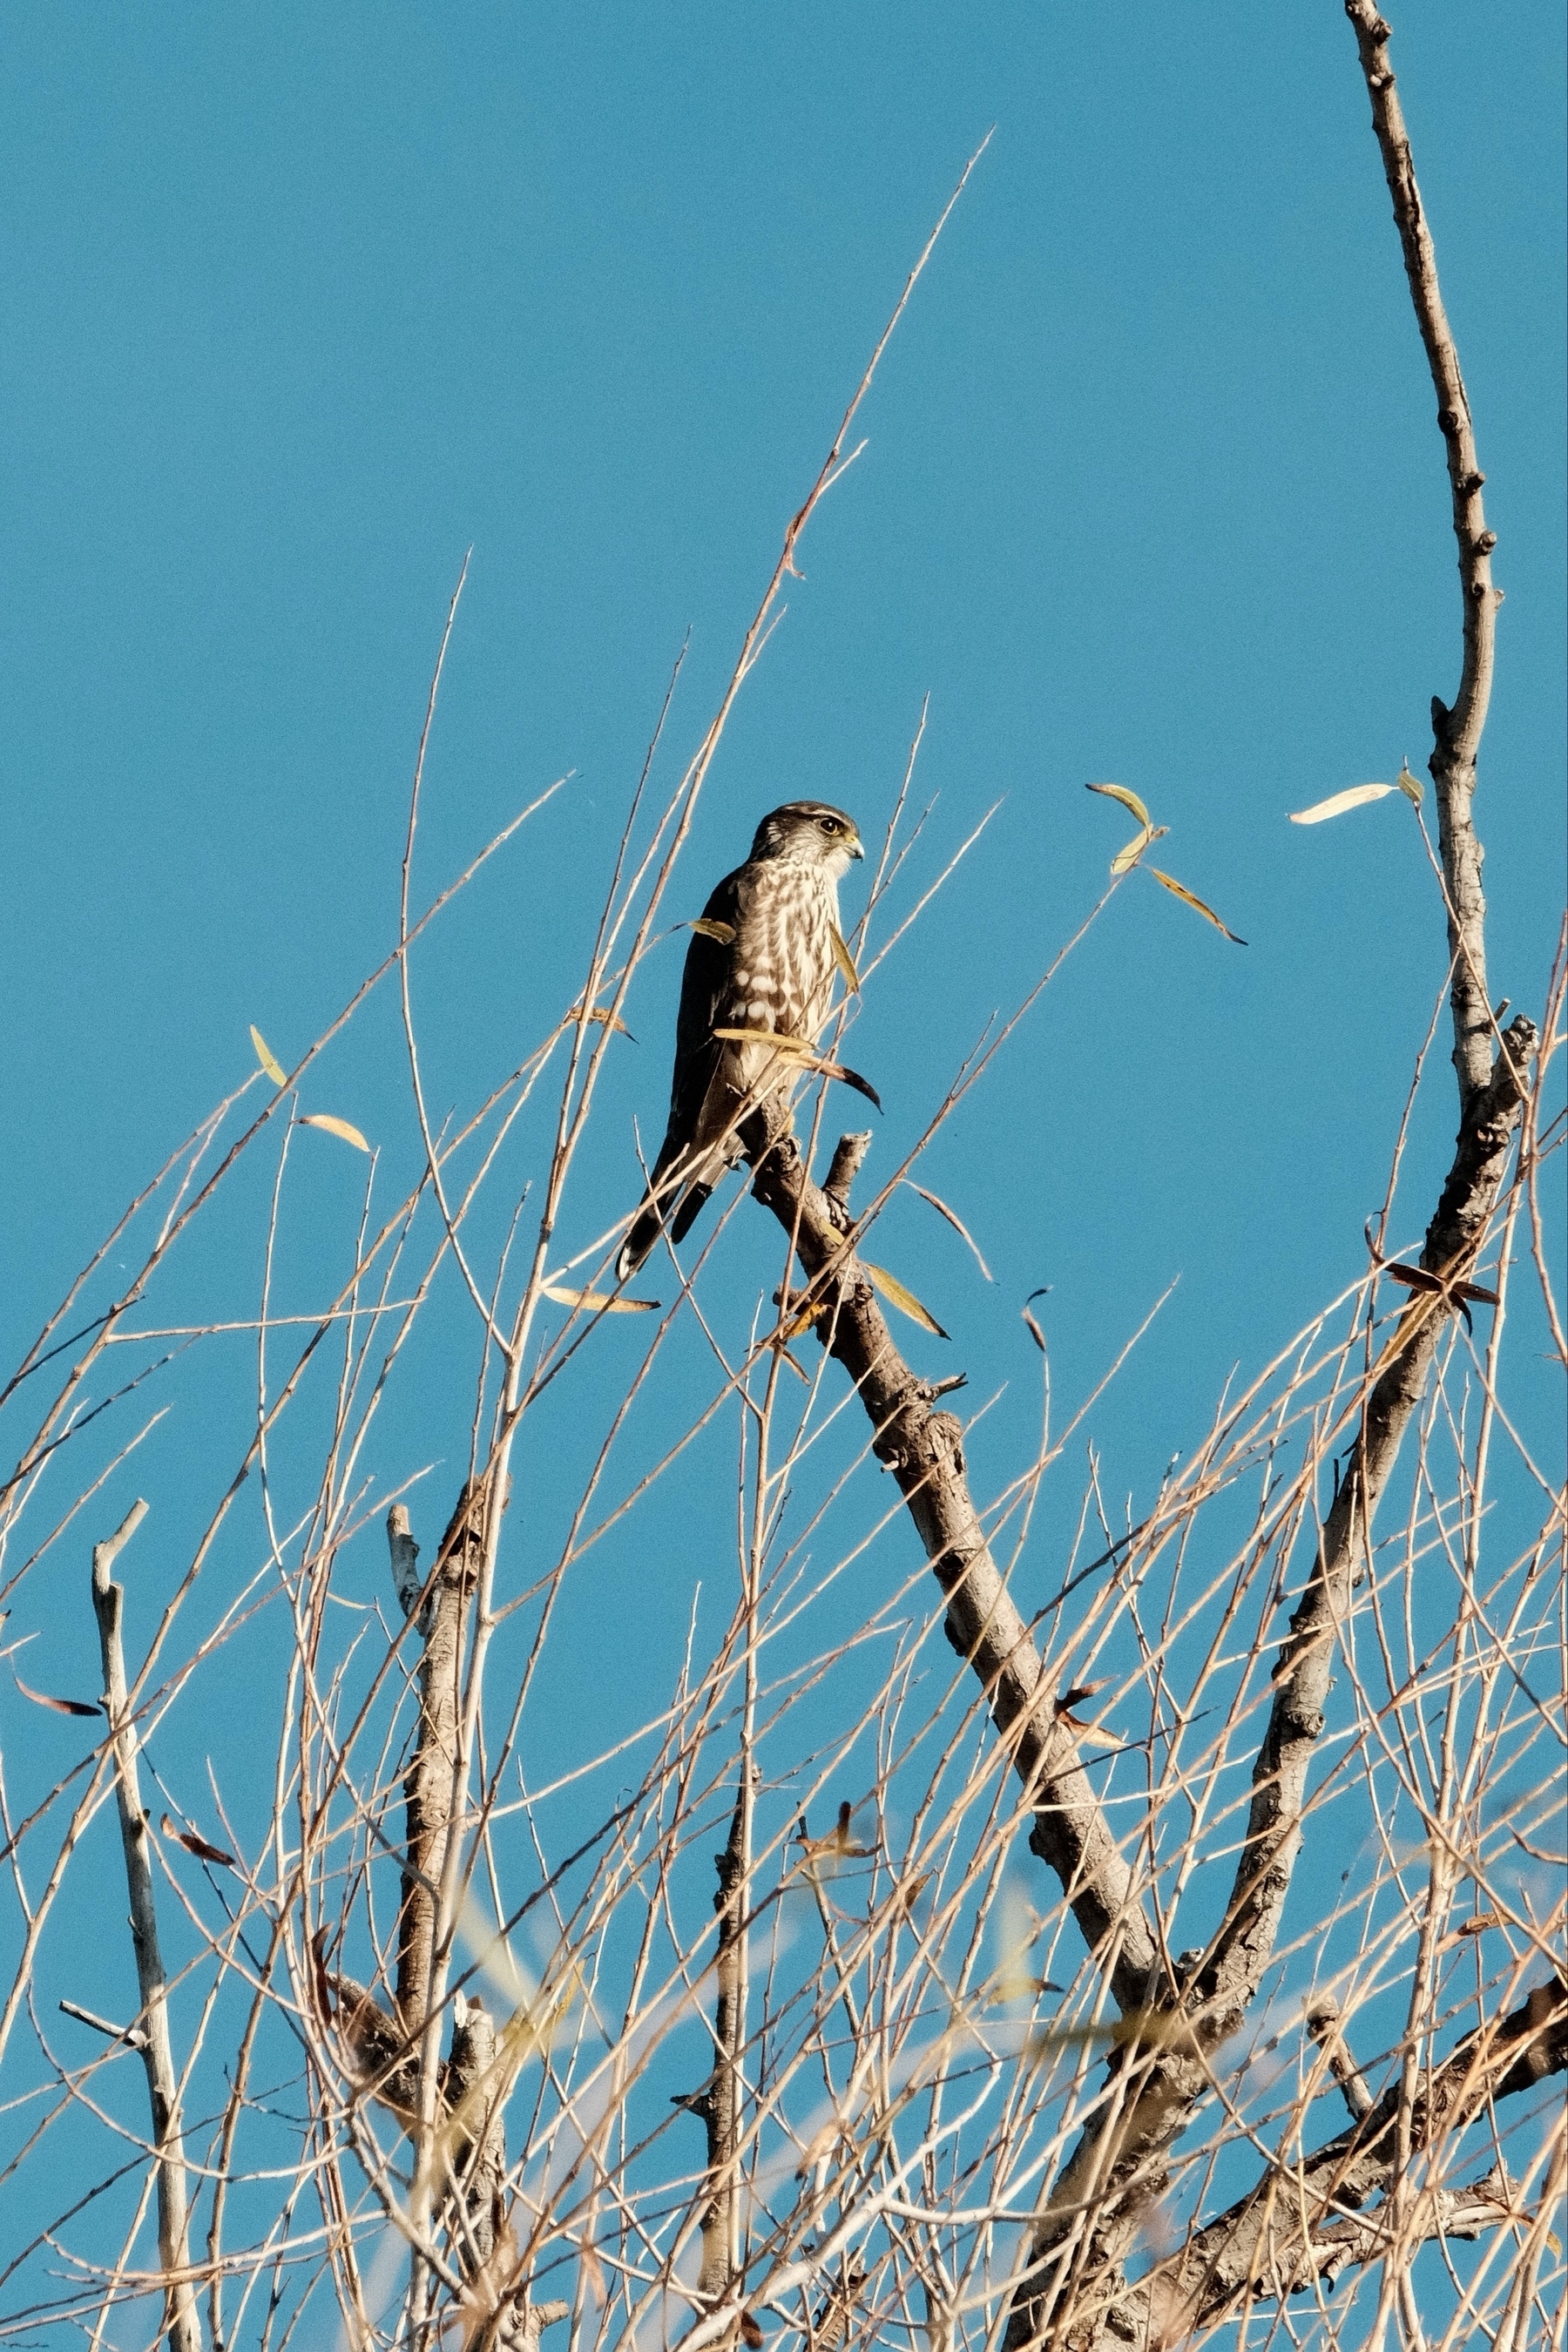 A Merlin perched on a leafless tree branch against a clear blue sky.